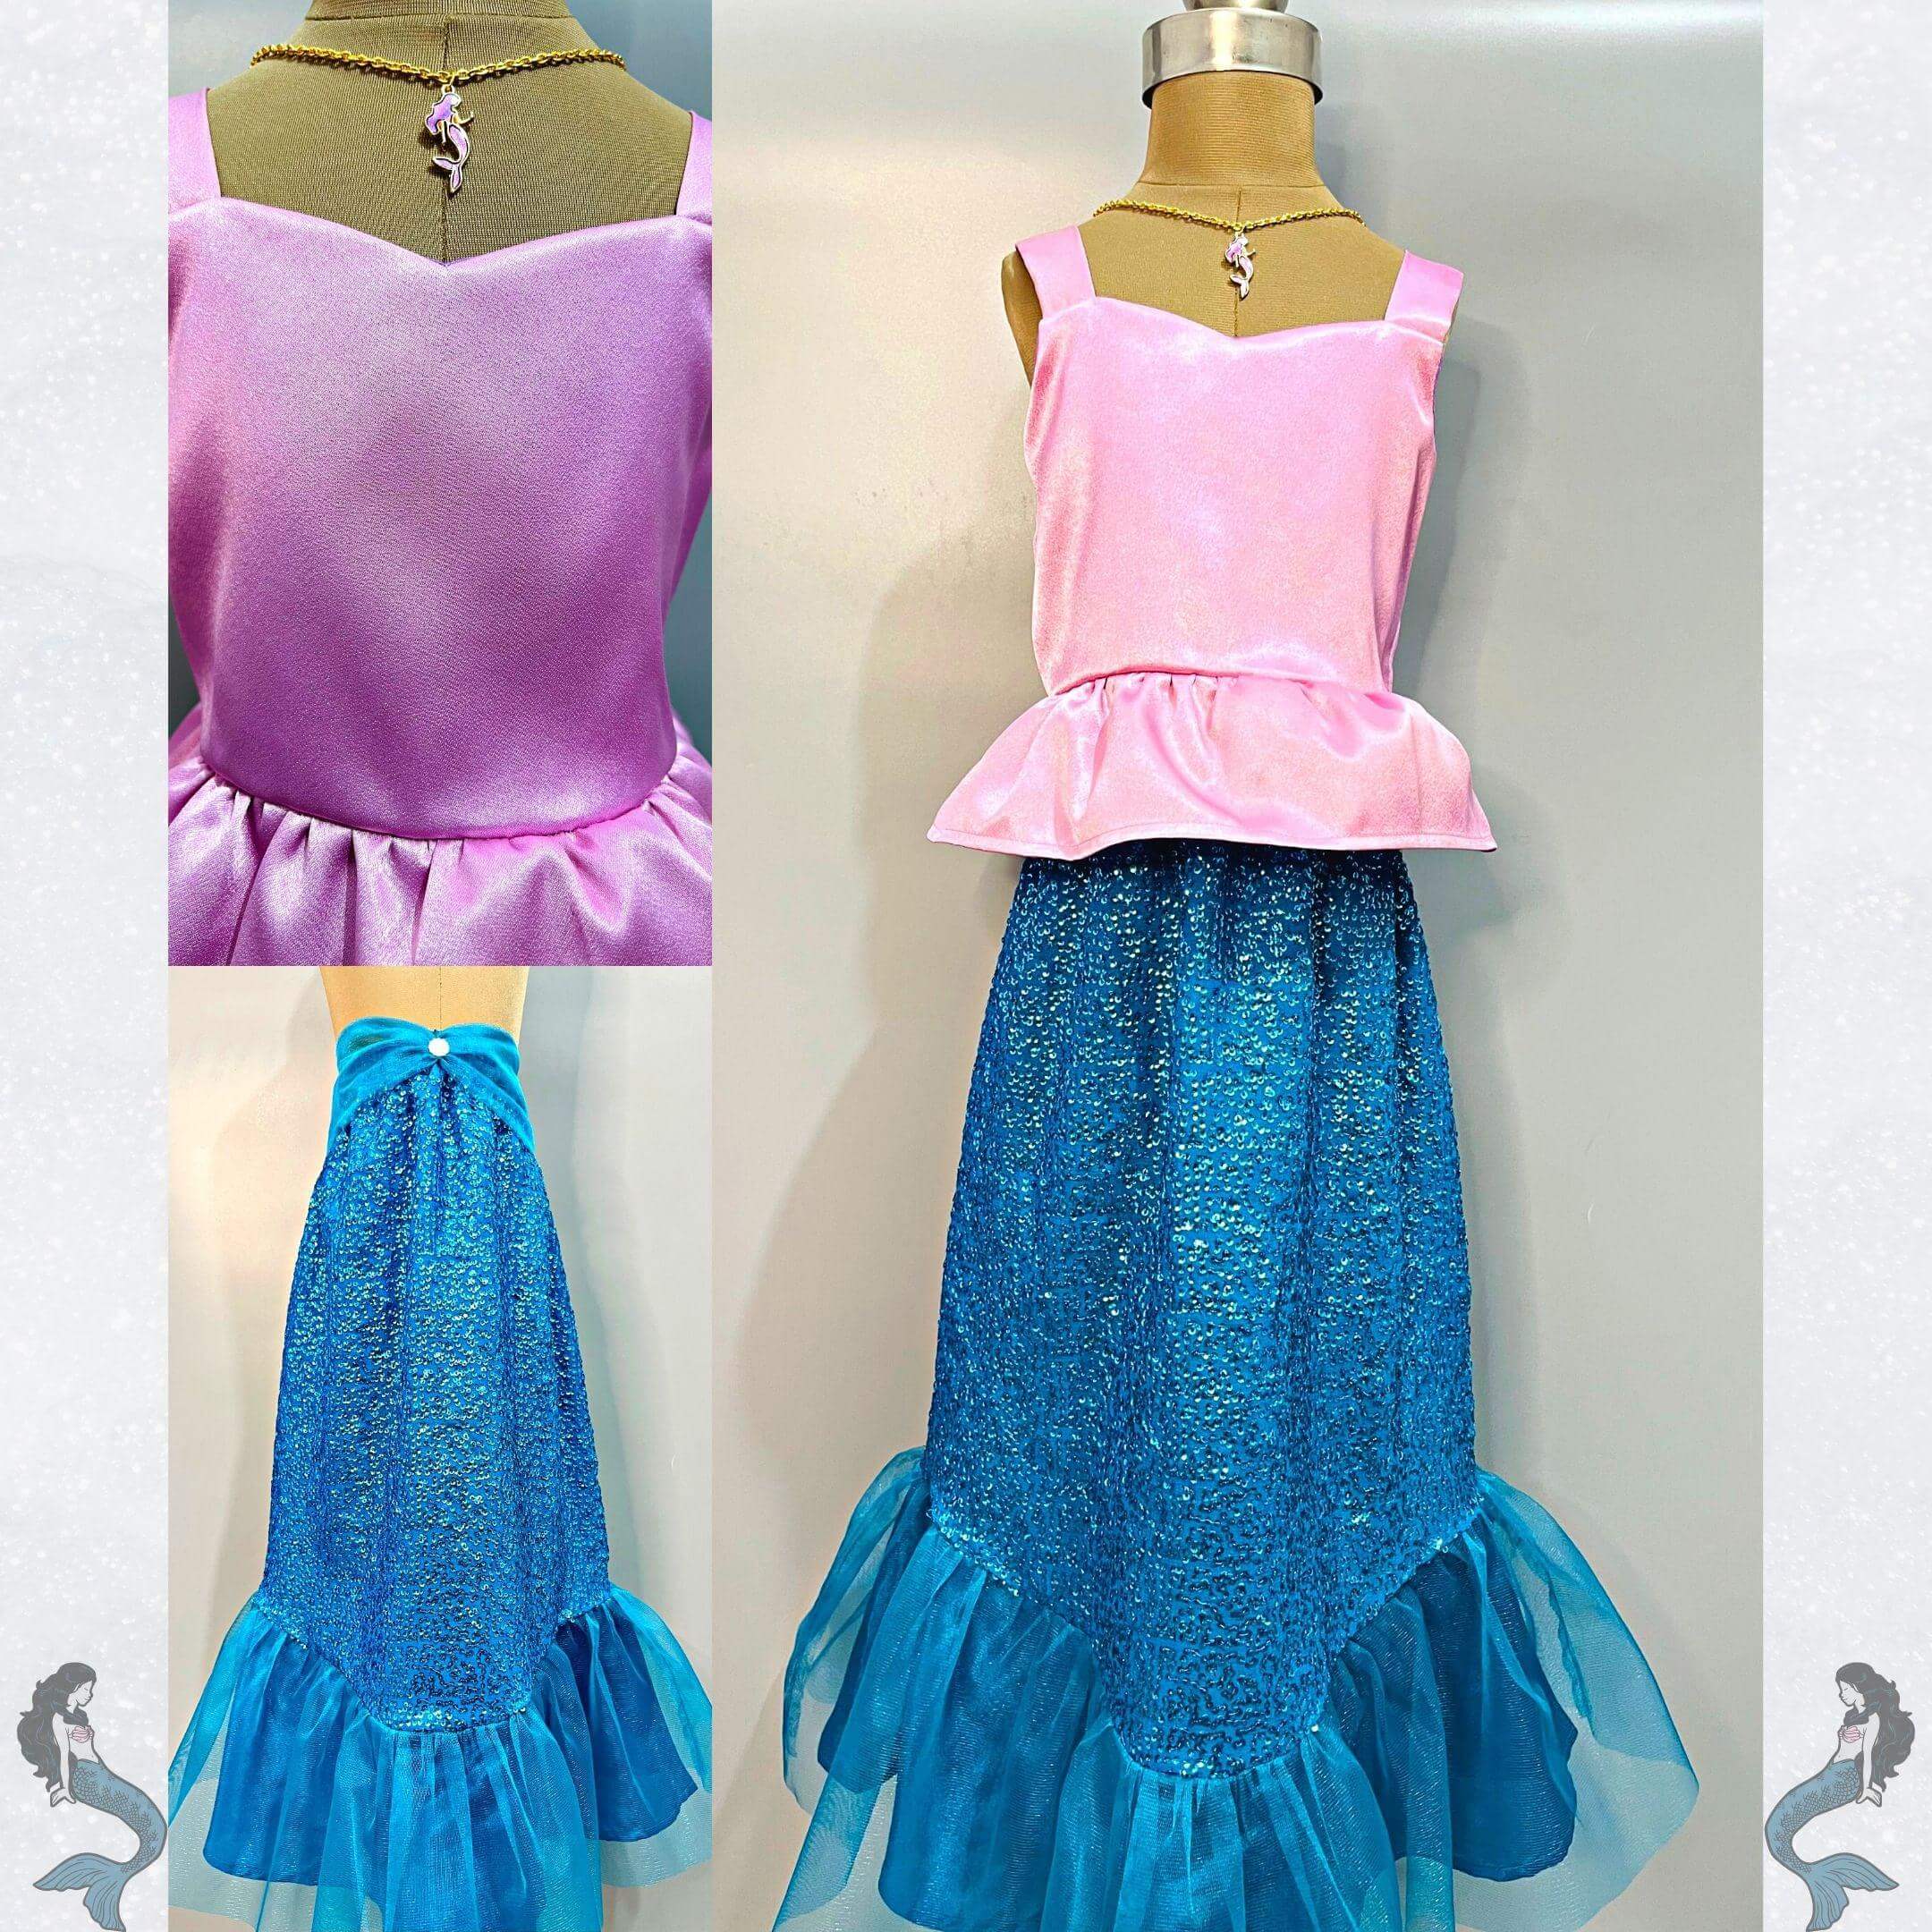 How to CUT and SEW a MERMAID DRESS with ILLUSION EFFECT and TRAIN | PROM  DRESS | MERMAID SKIRT - YouTube